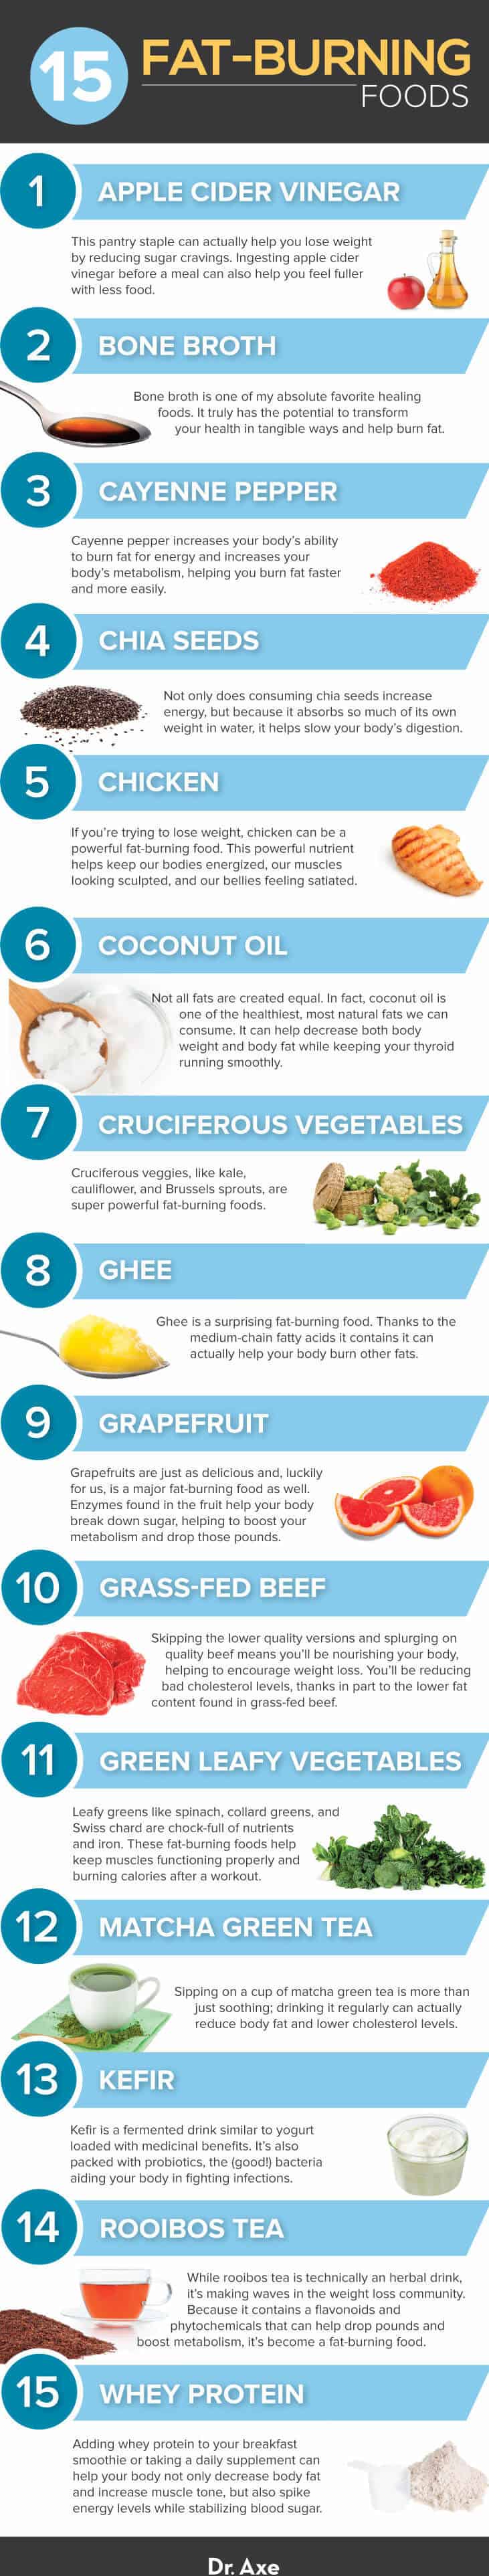 The Top 3 Fat-Burning Foods